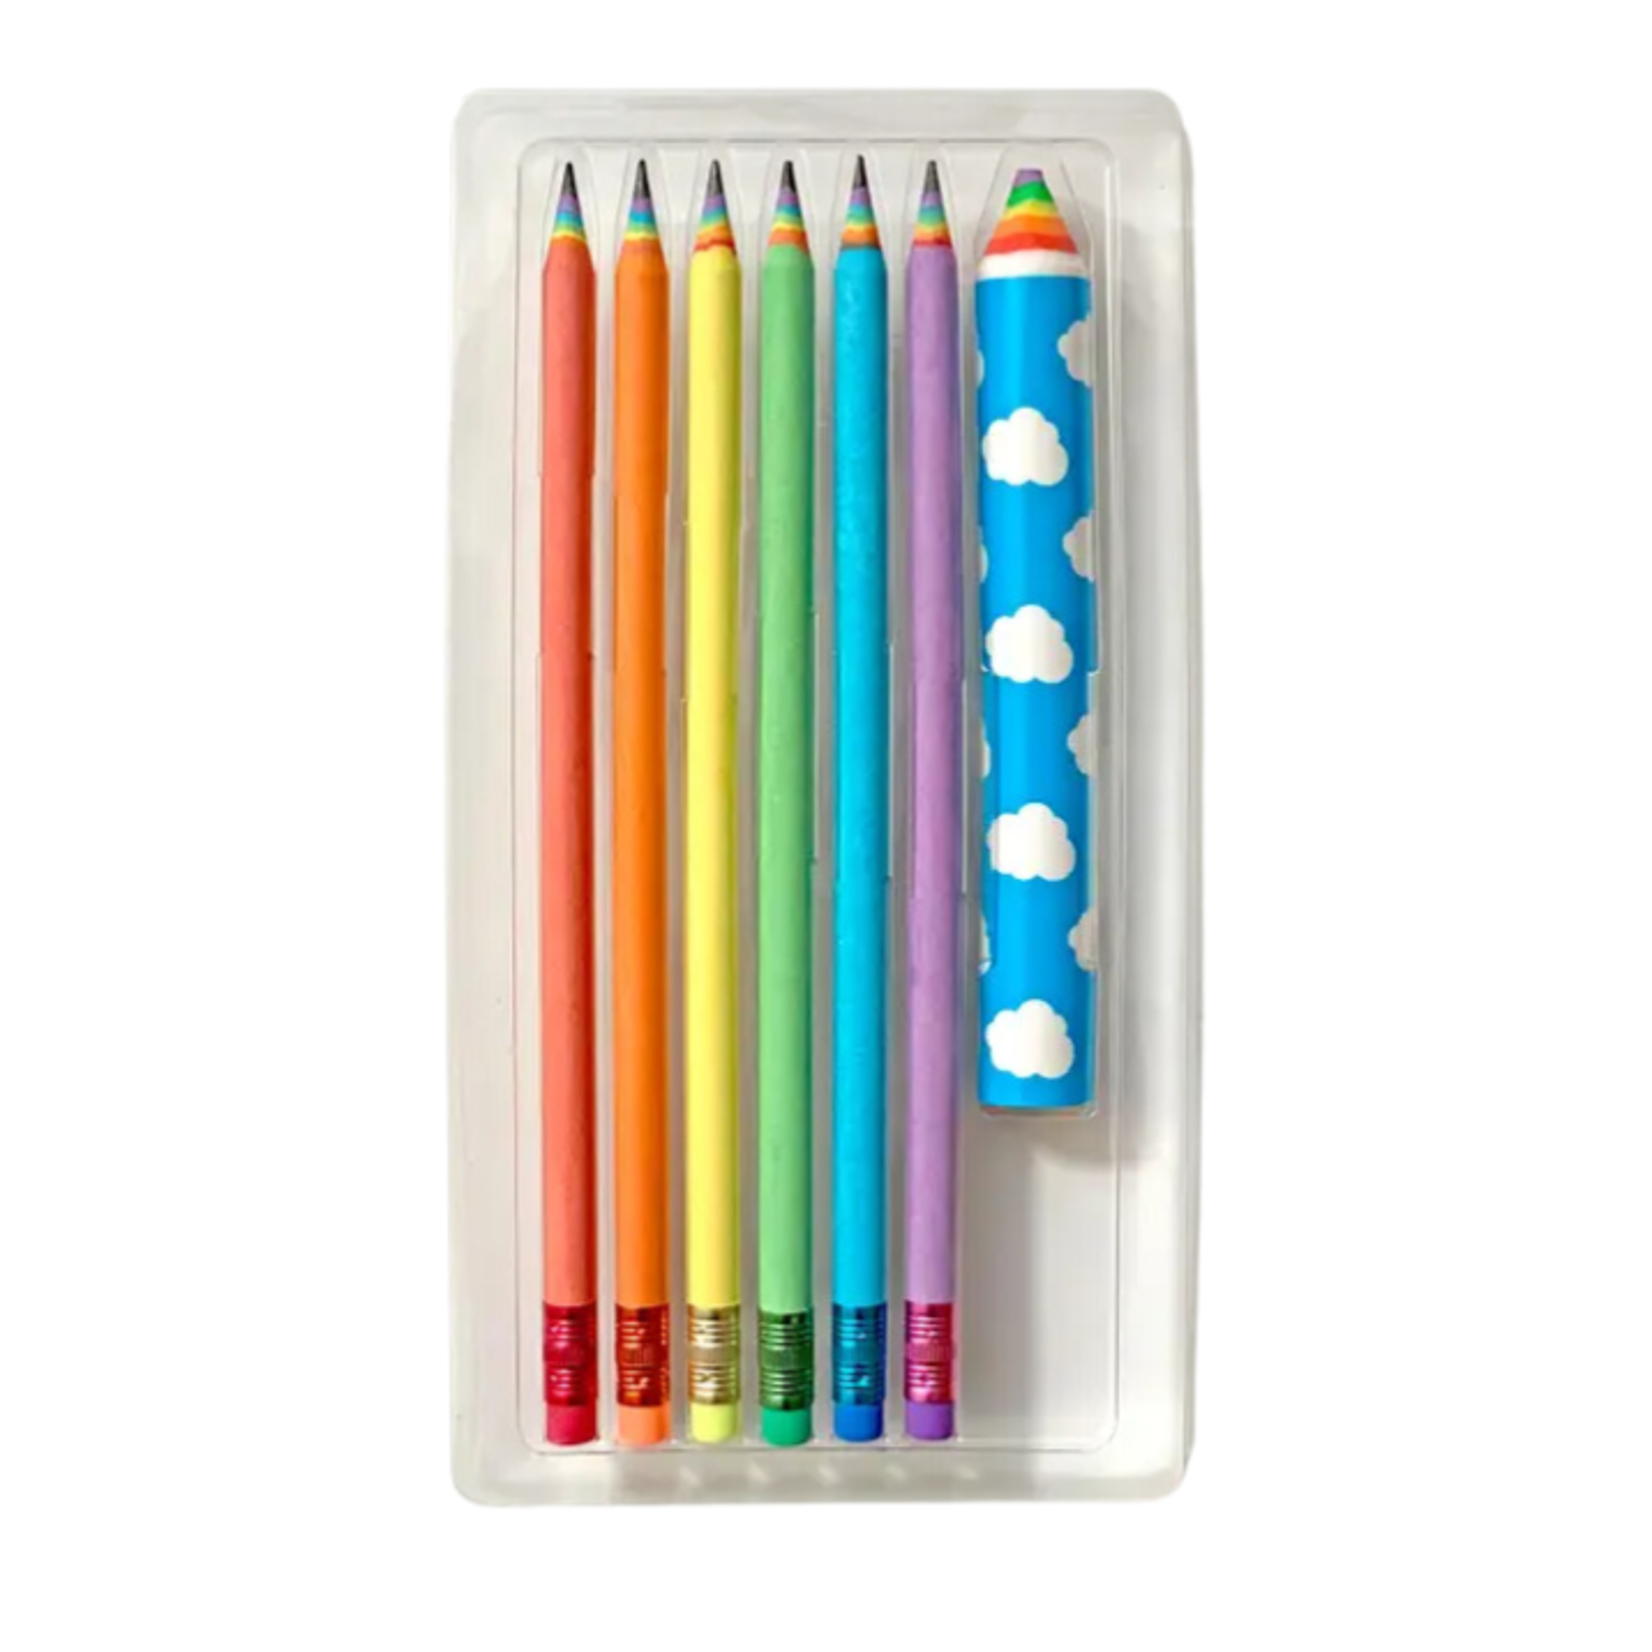 Snifty Recycled Rainbow Pencil Set